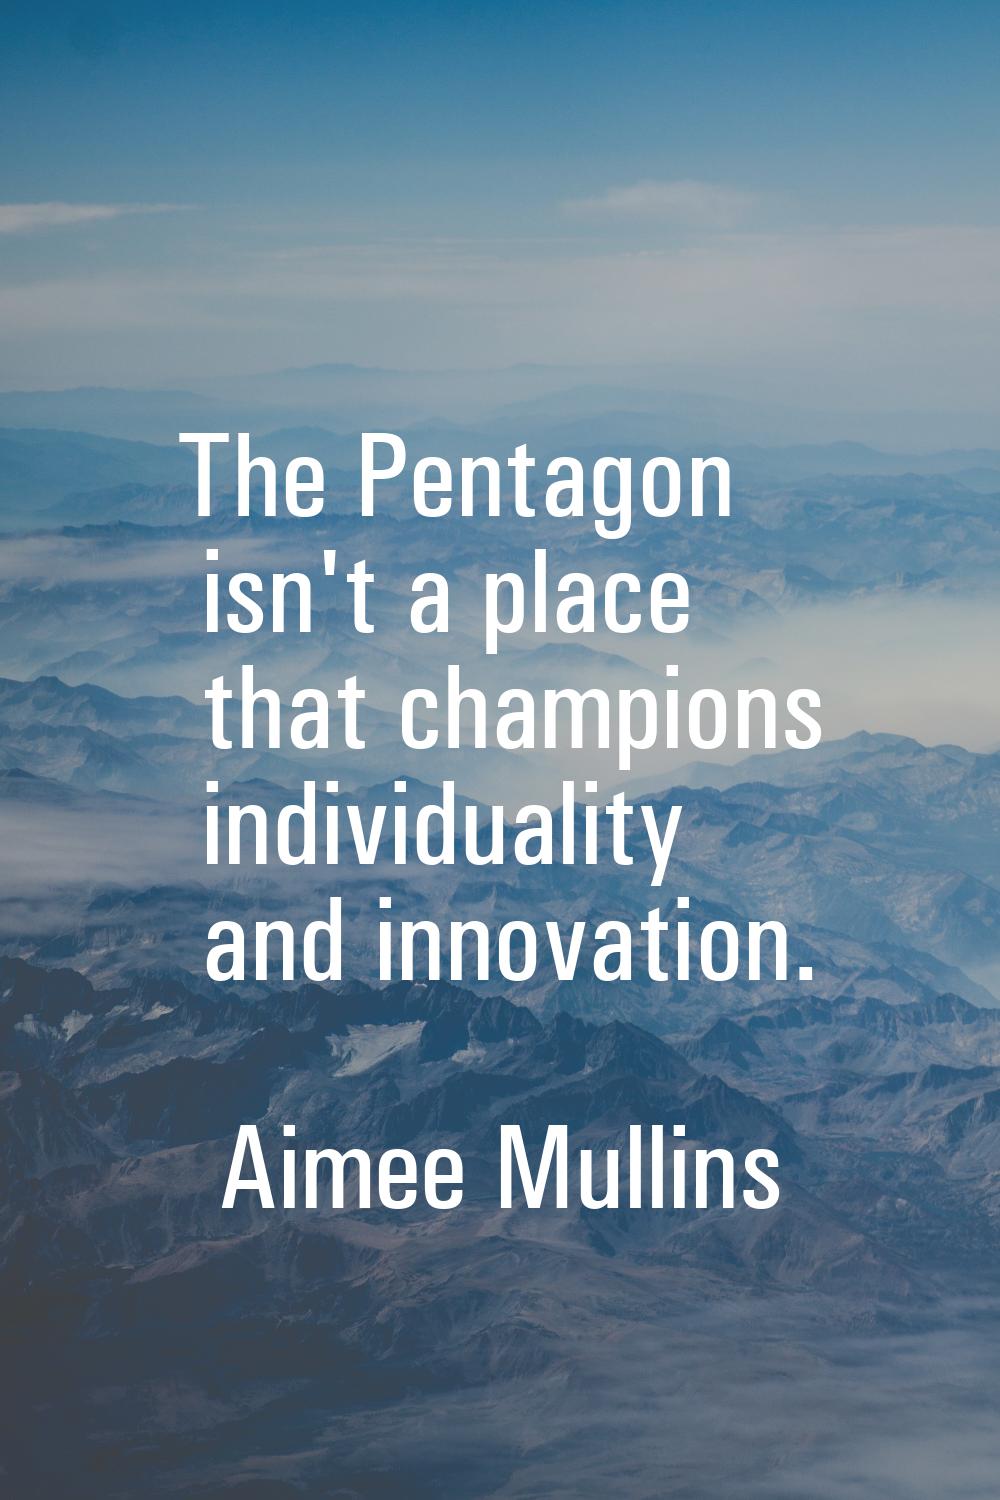 The Pentagon isn't a place that champions individuality and innovation.